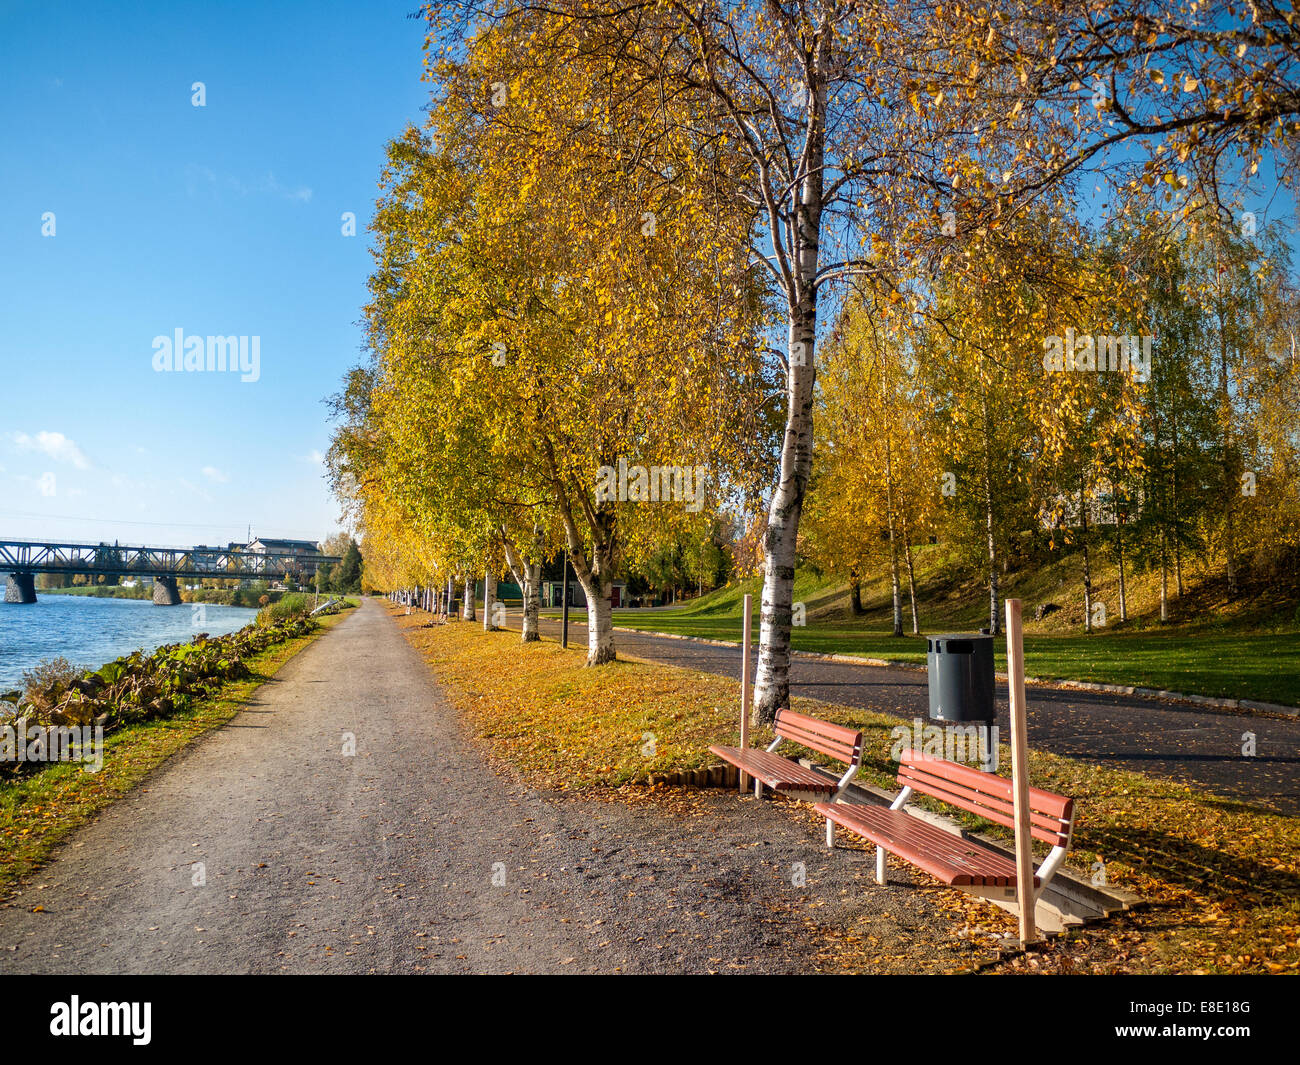 Park alley in autumn colors Stock Photo